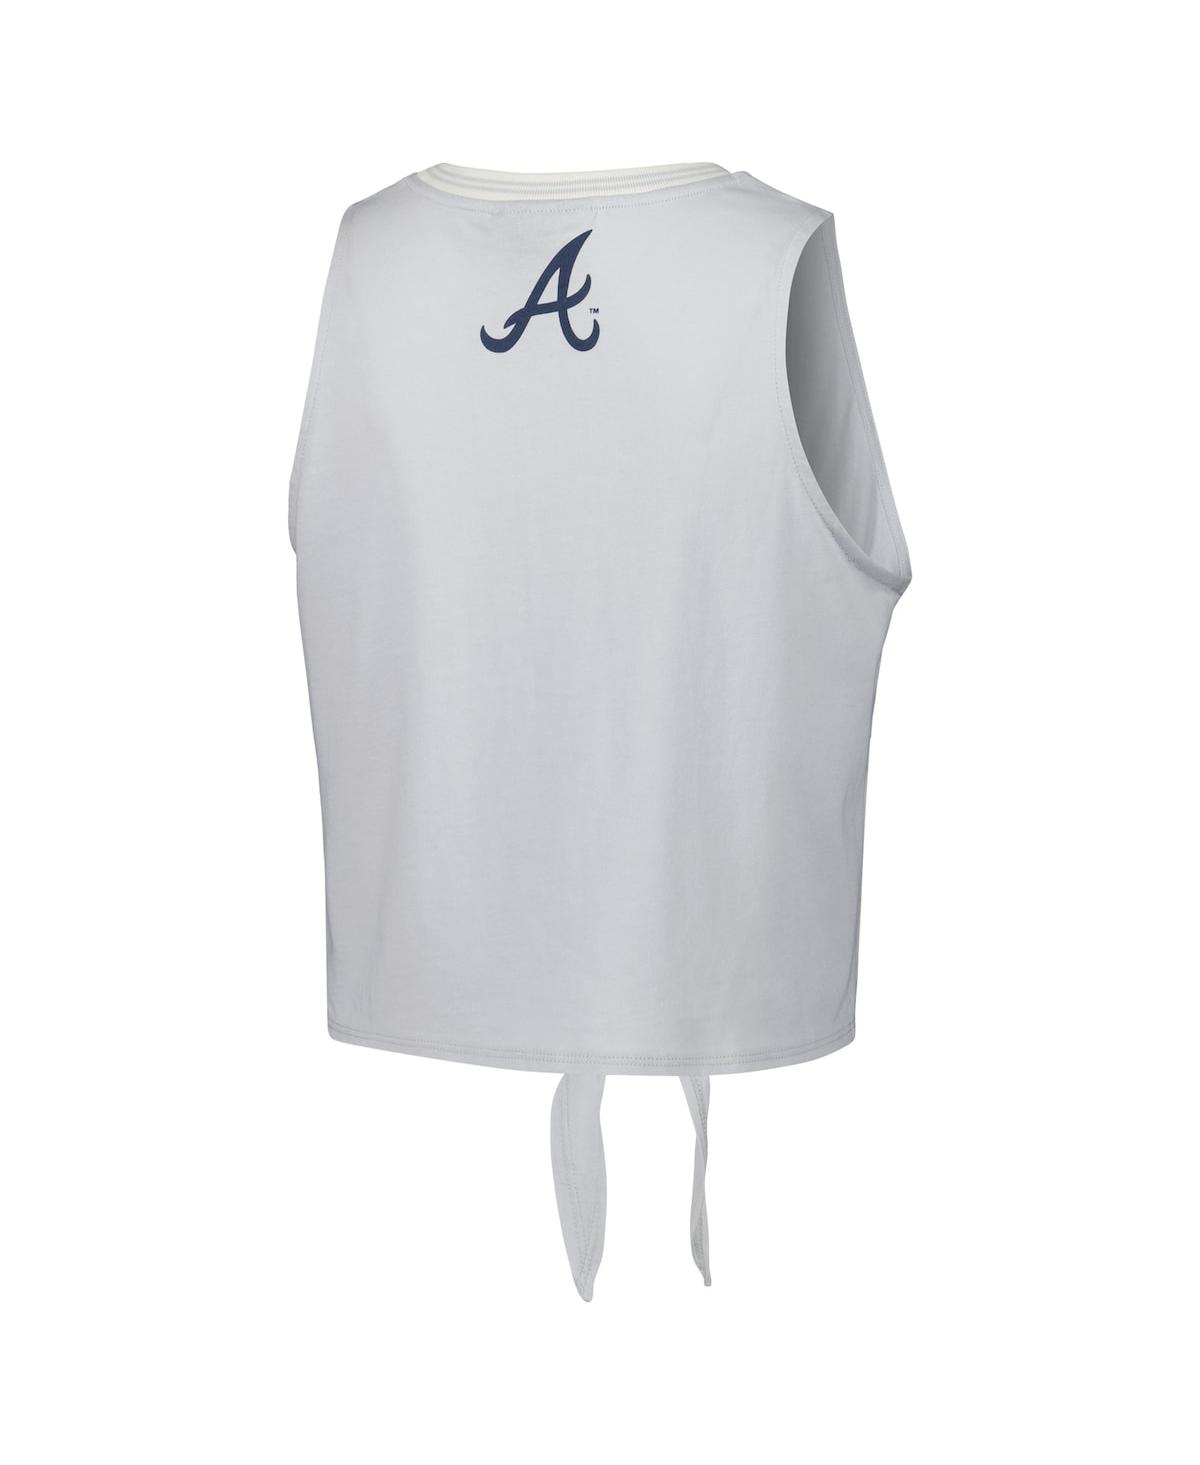 Shop The Wild Collective Women's  Gray Atlanta Braves Twisted Tie Front Tank Top